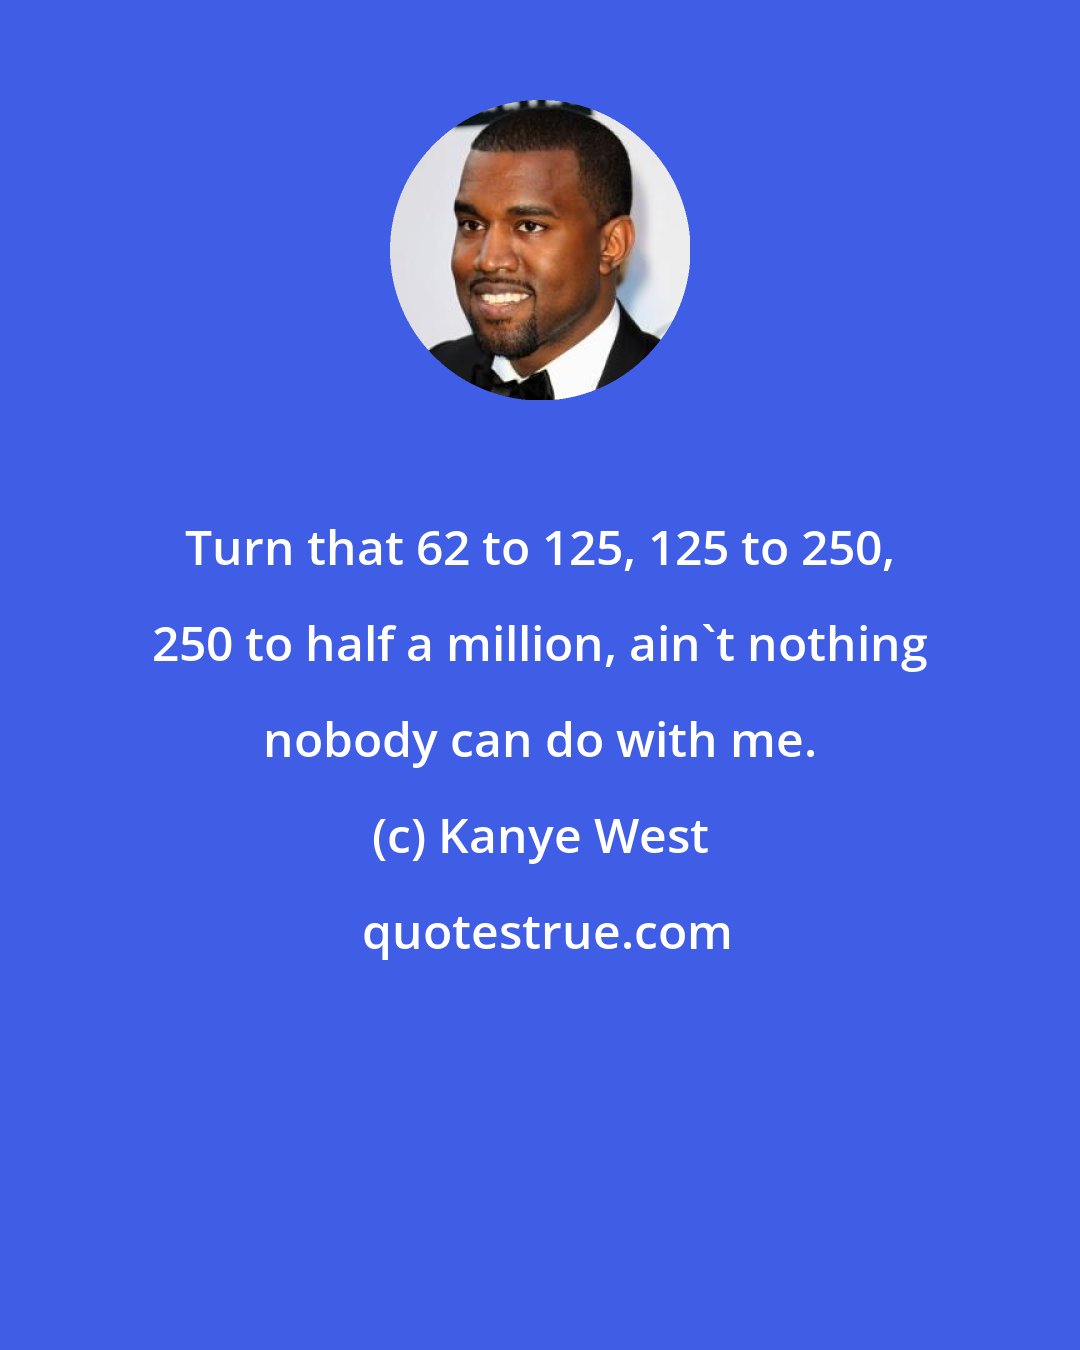 Kanye West: Turn that 62 to 125, 125 to 250, 250 to half a million, ain't nothing nobody can do with me.